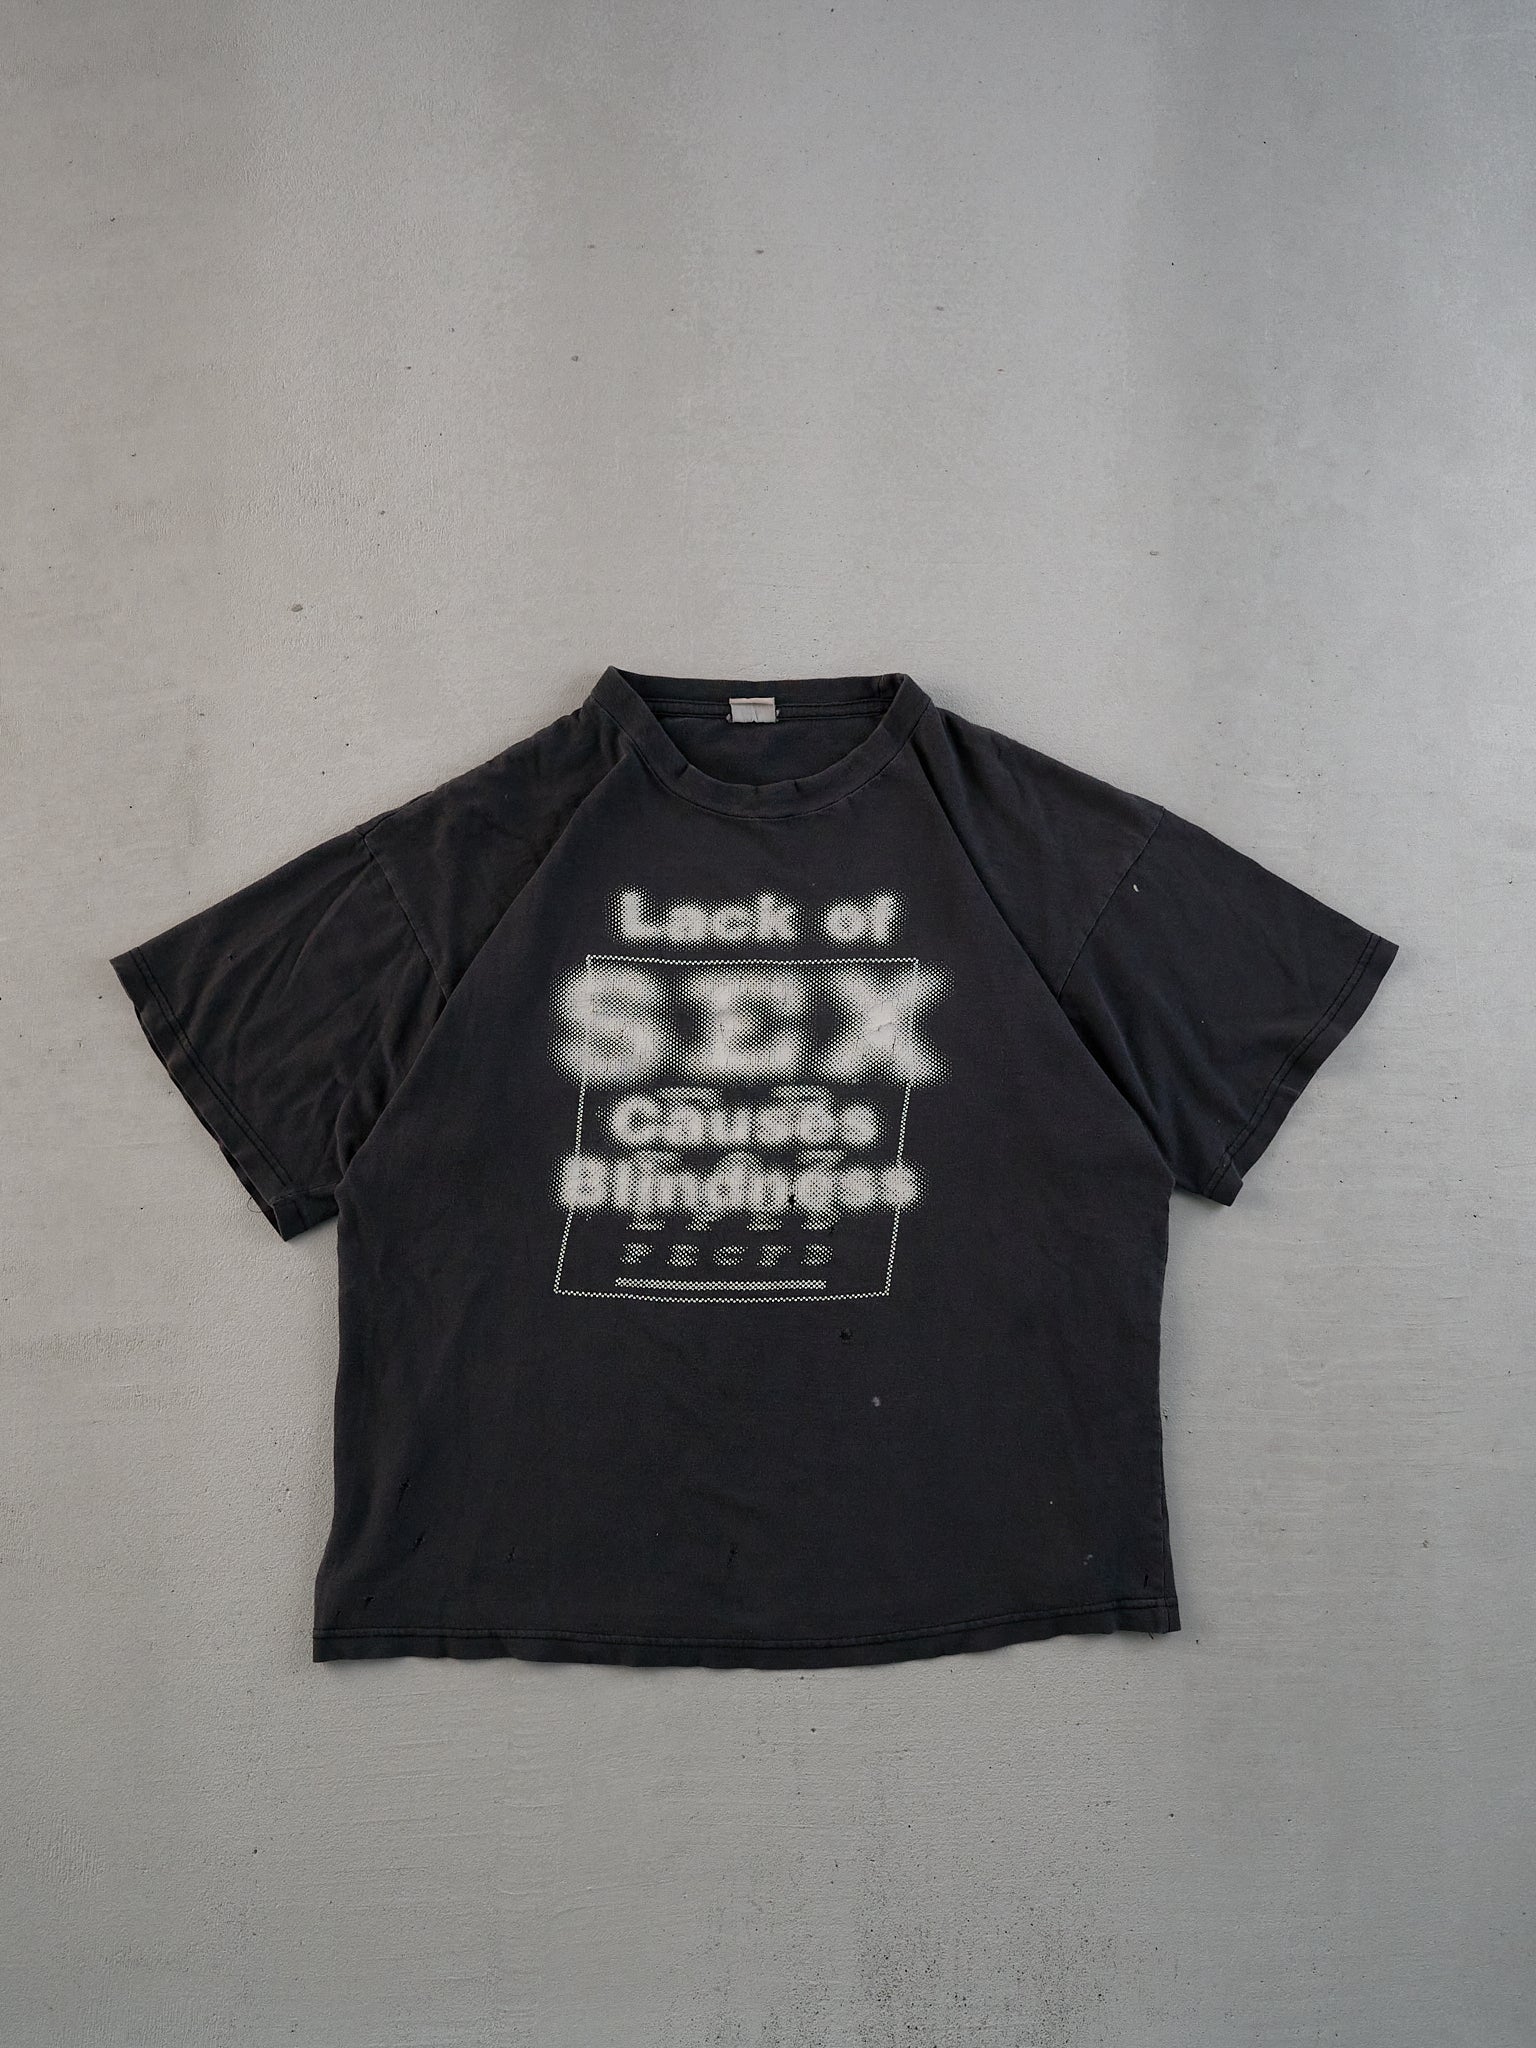 Vintage 90s Washed Black "Lack of Sex Causes Blindness" Tee (M)